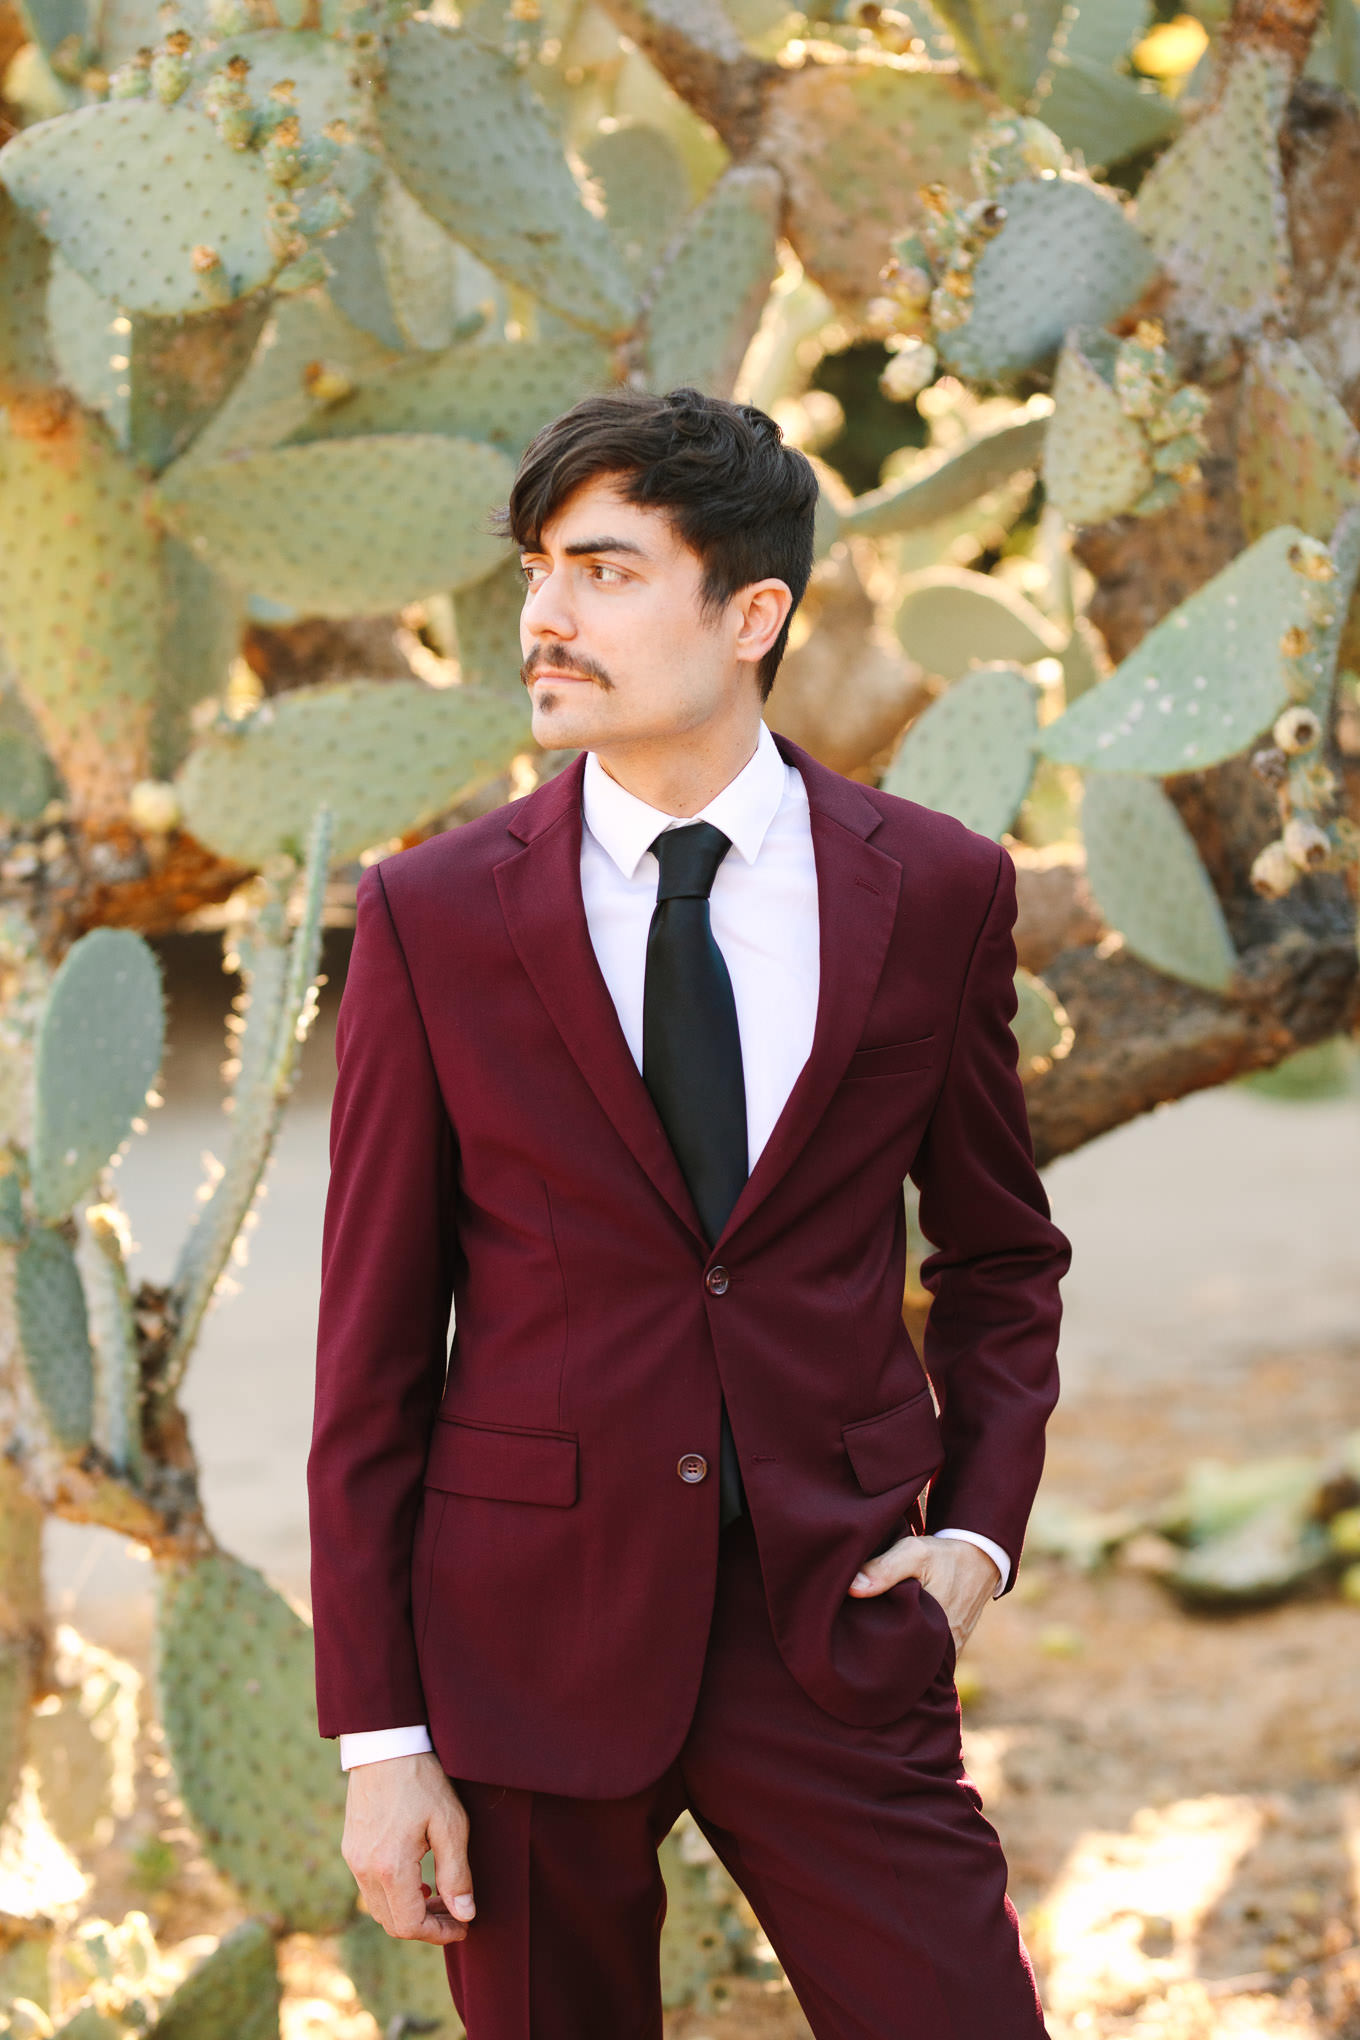 Groom wearing burgundy suit posed in front of cacti | Los Angeles Arboretum Elopement | Colorful and elevated wedding photography for fun-loving couples in Southern California | #LosAngelesElopement #elopement #LAarboretum #LAskyline #elopementphotos   Source: Mary Costa Photography | Los Angeles